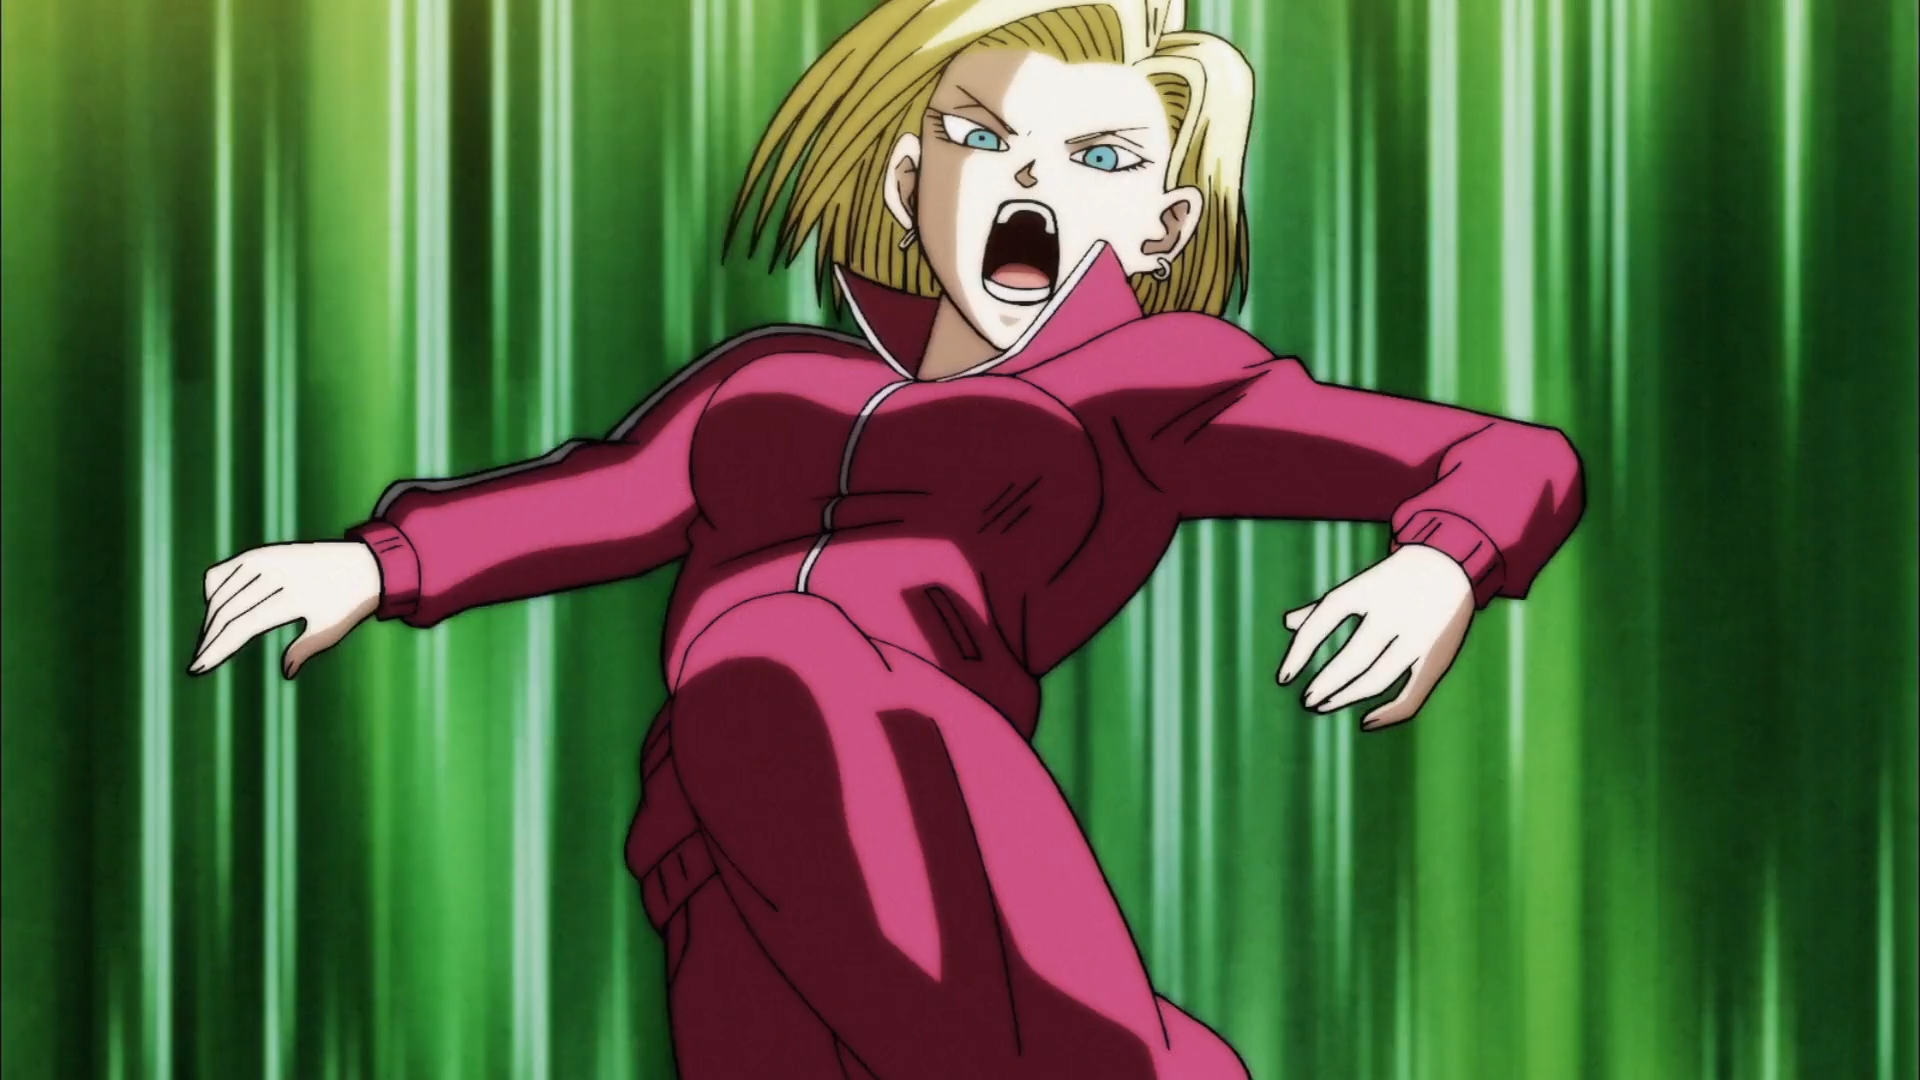 android 18 wallpaper,animated cartoon,cartoon,facial expression,anime,fictional character